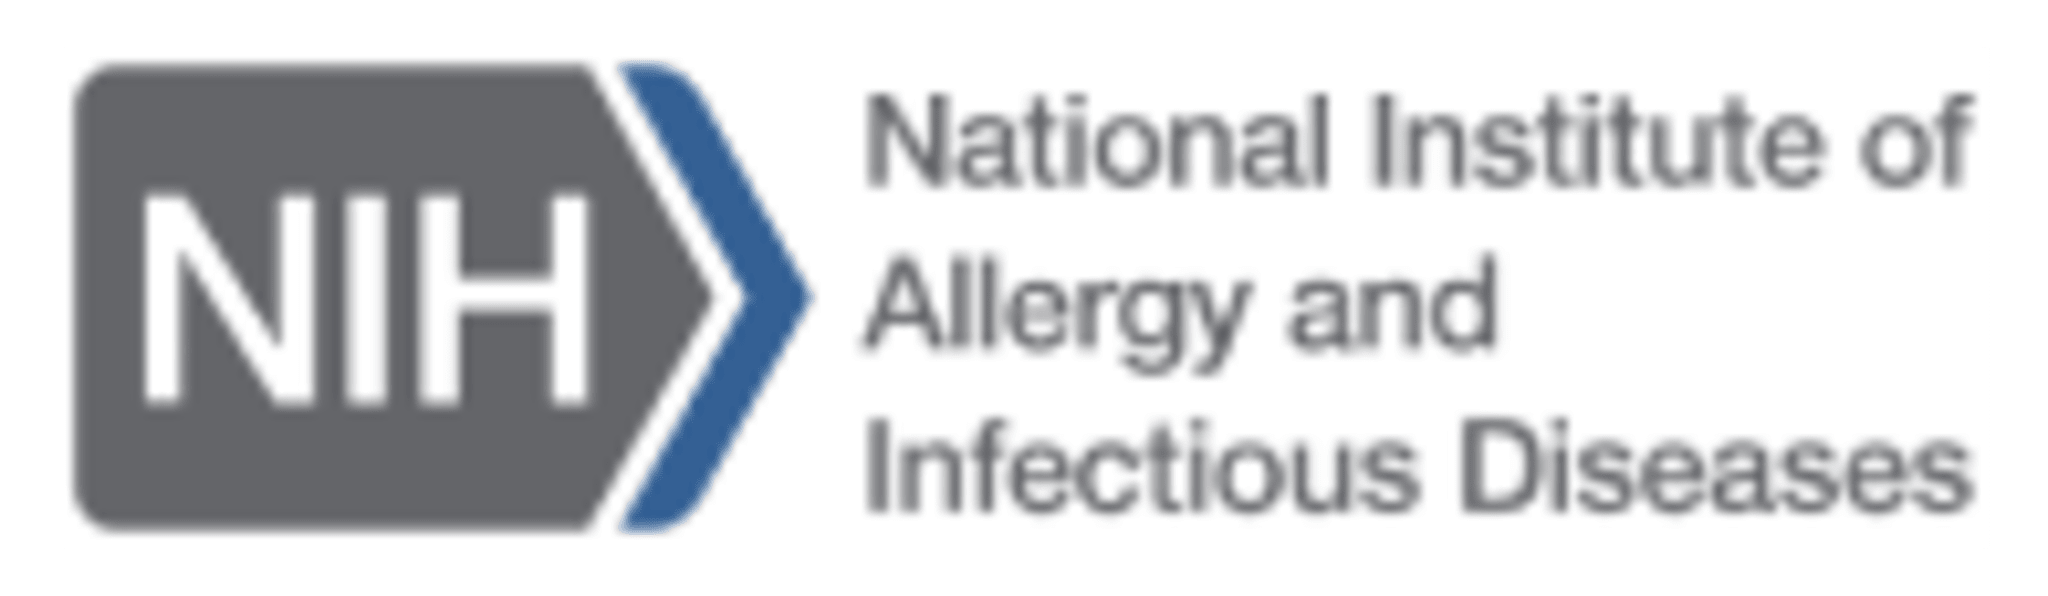 National Institute of Allergy and Infectious Diseases Logo